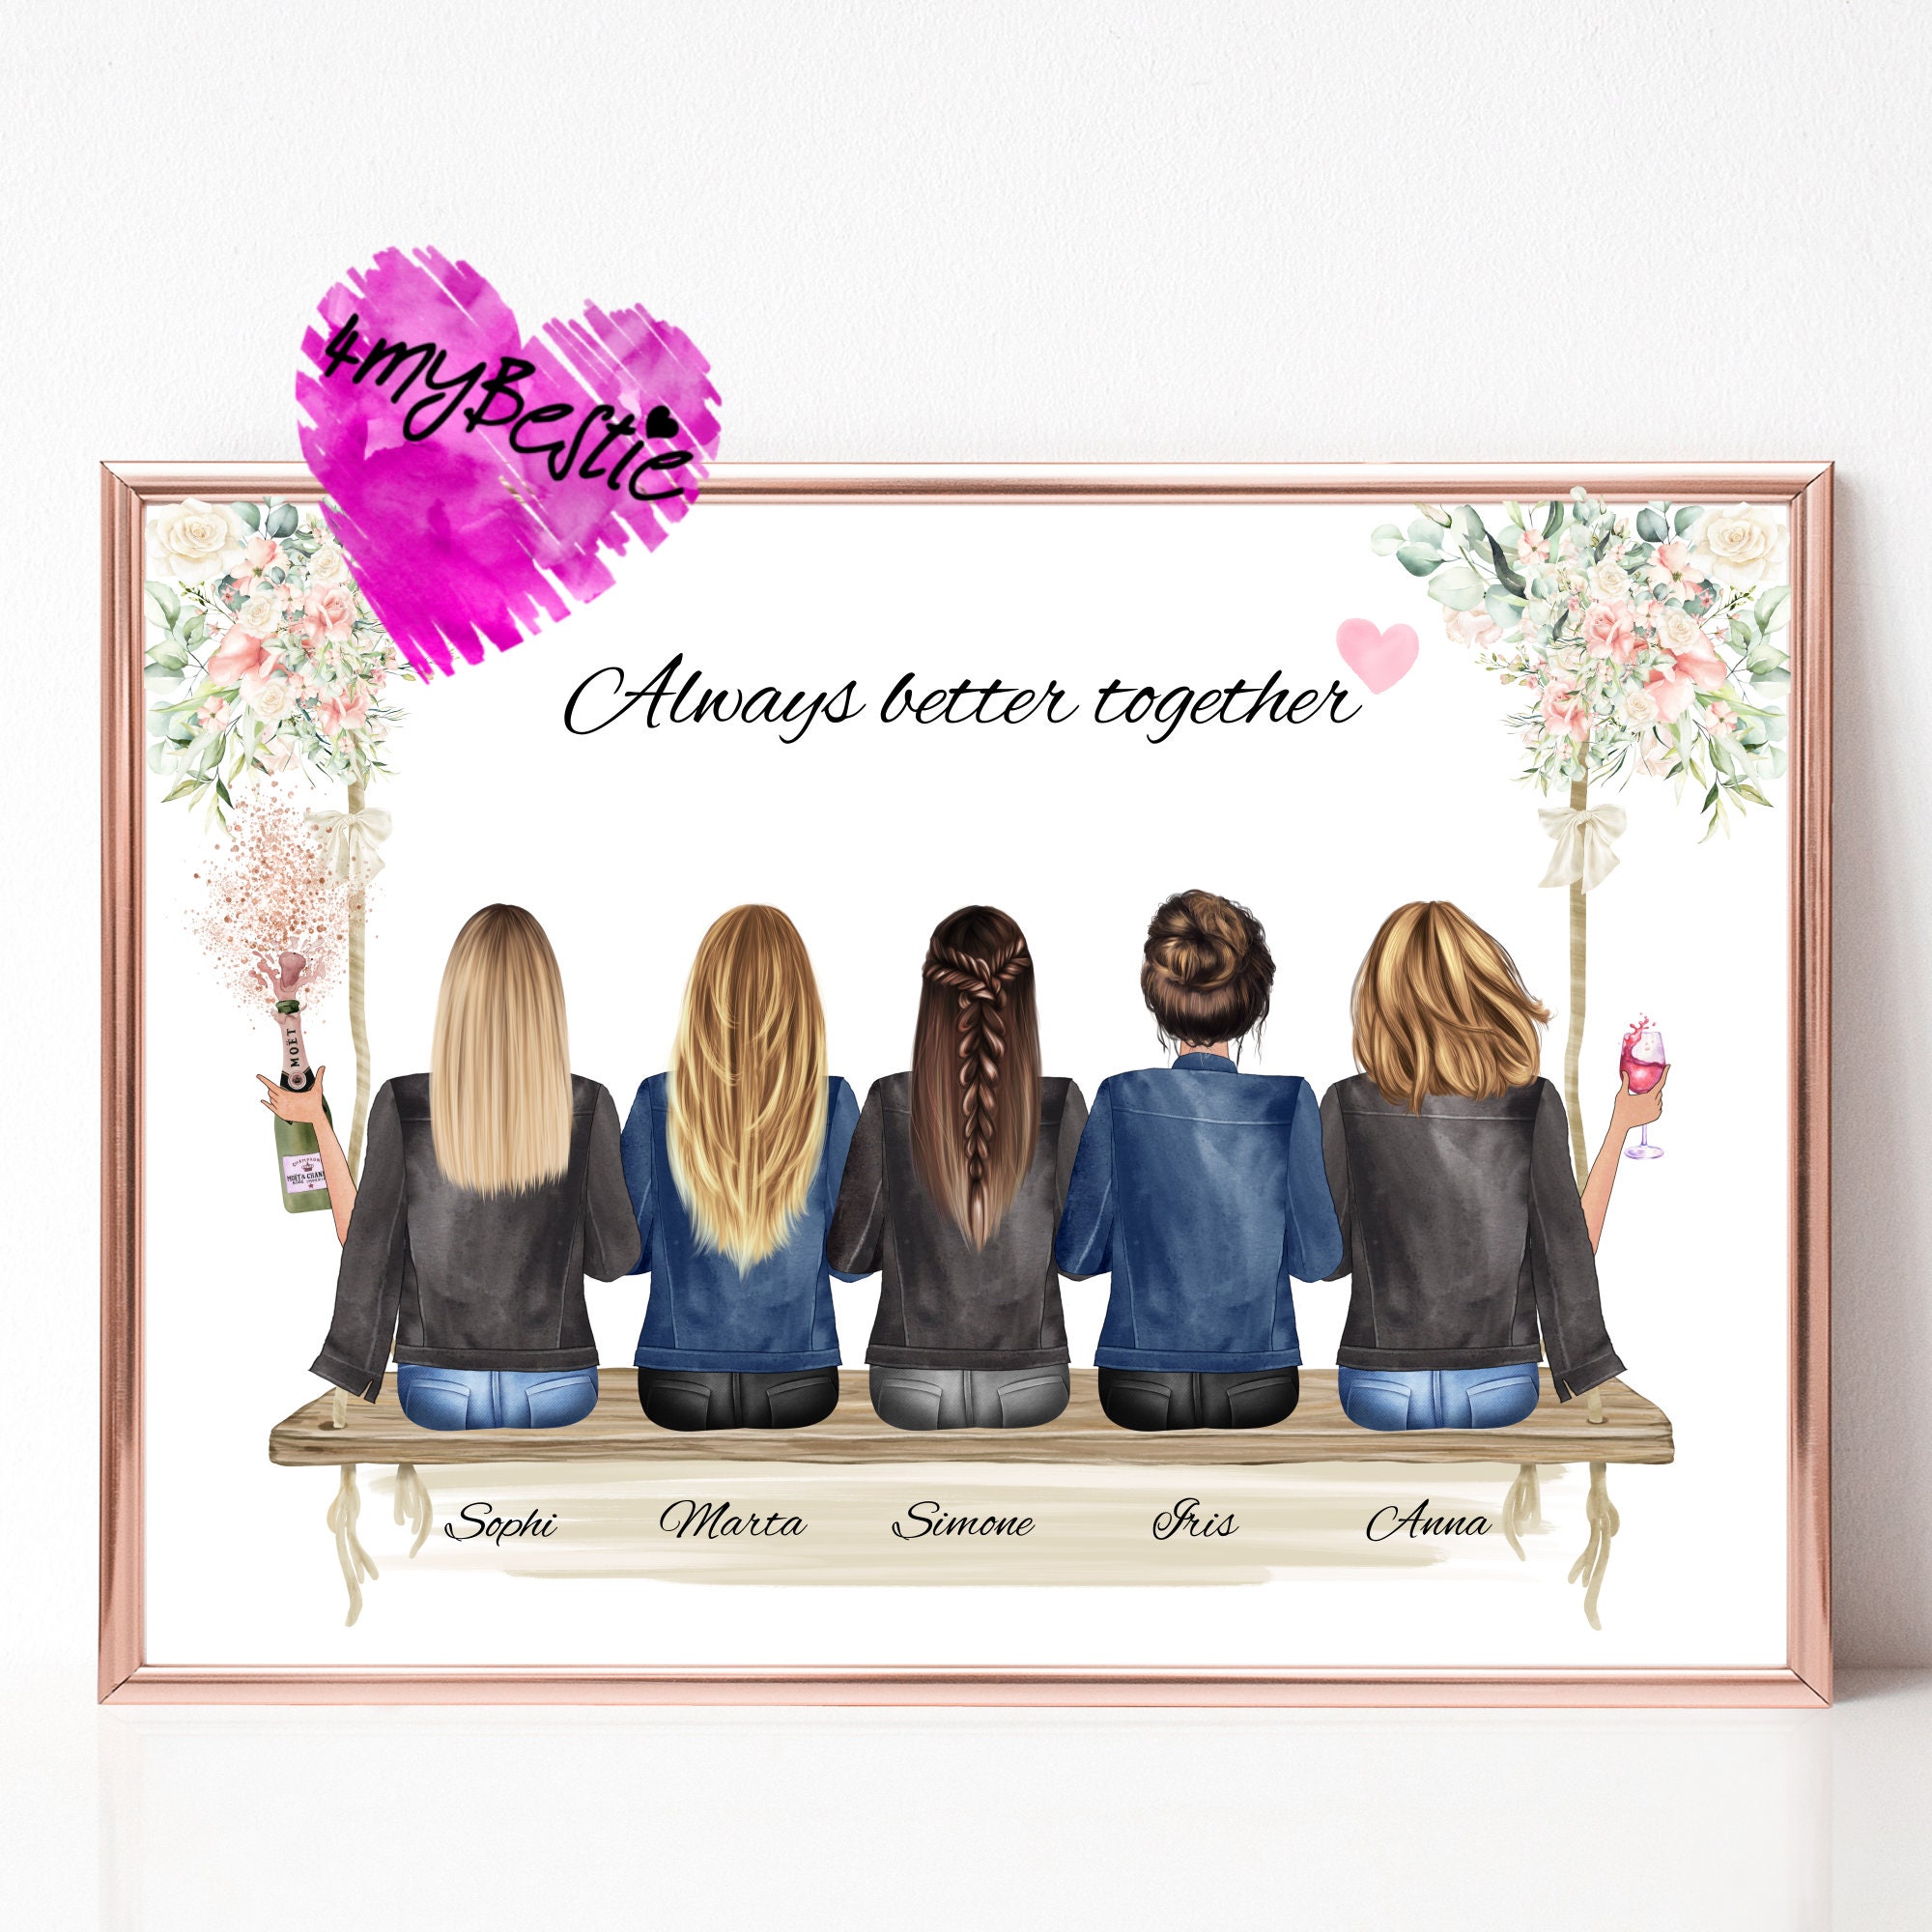 Girlfriends Gift Birthday Girlfriends Picture Personalized image pic picture